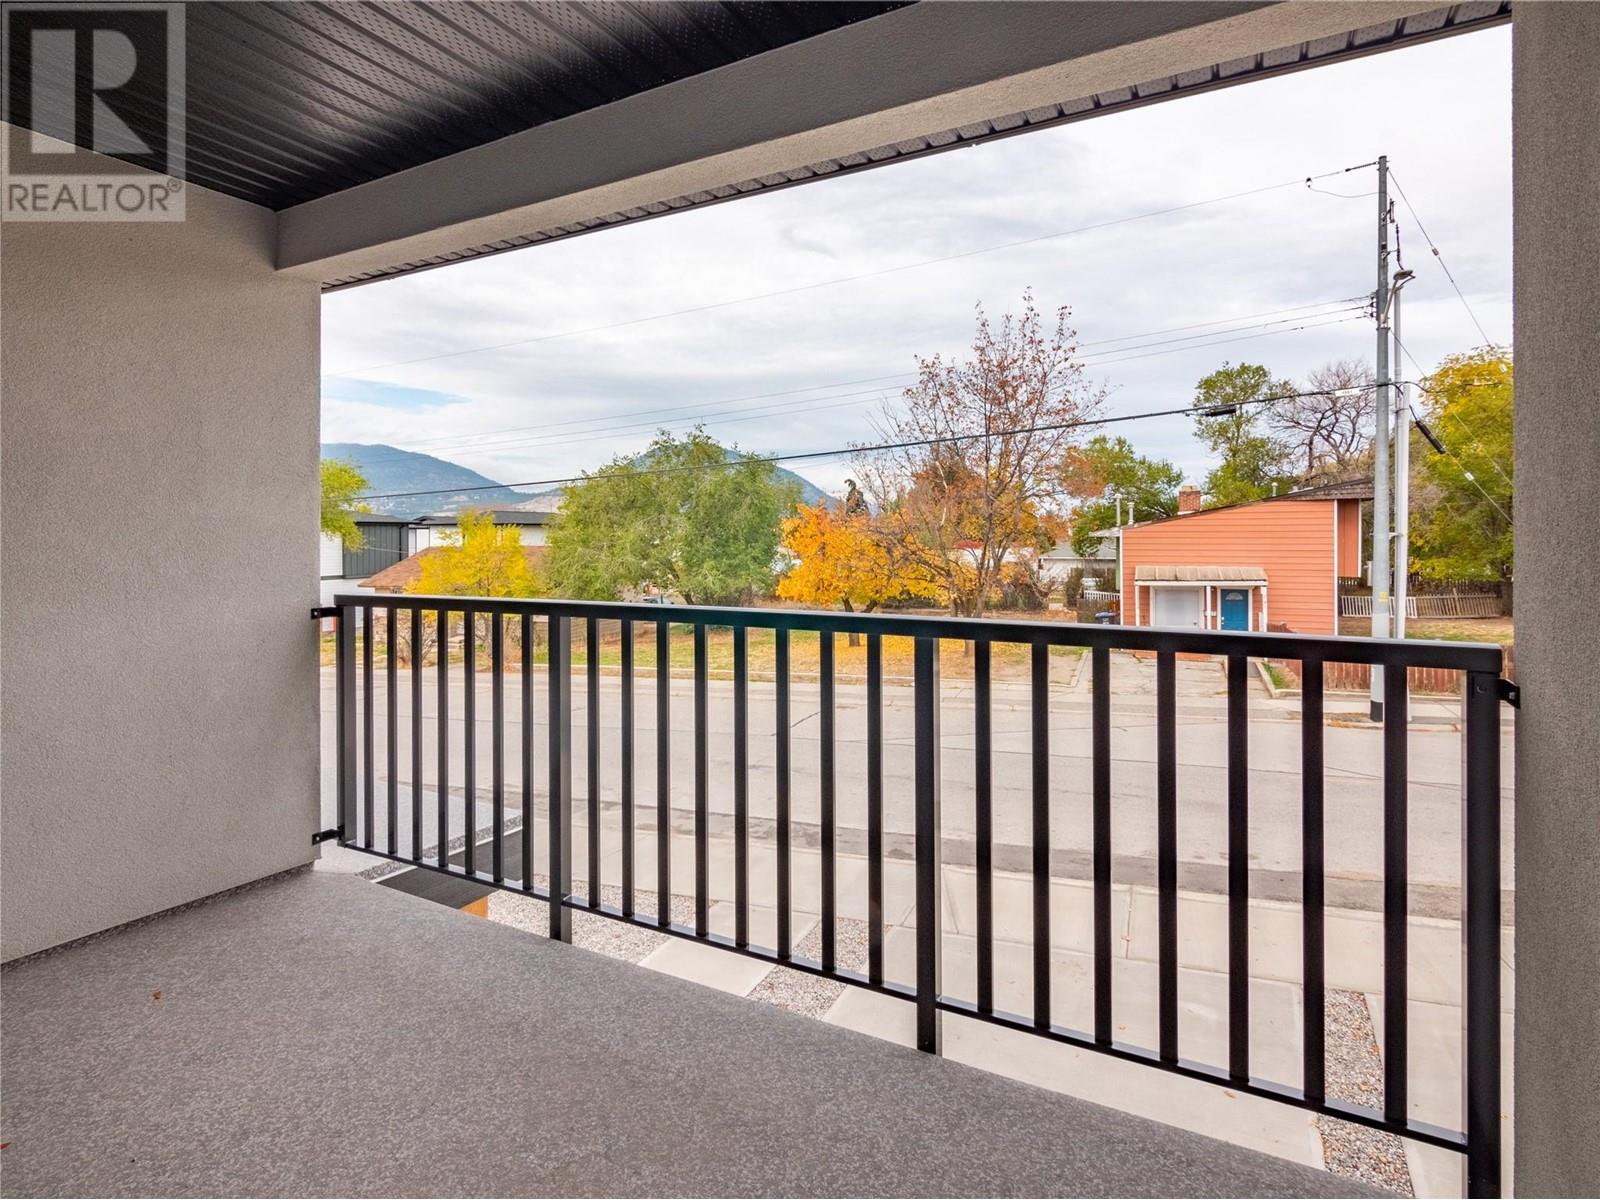 #1 592 Forestbrook Drive,, Penticton, British Columbia  V2A 4T8 - Photo 32 - 201626